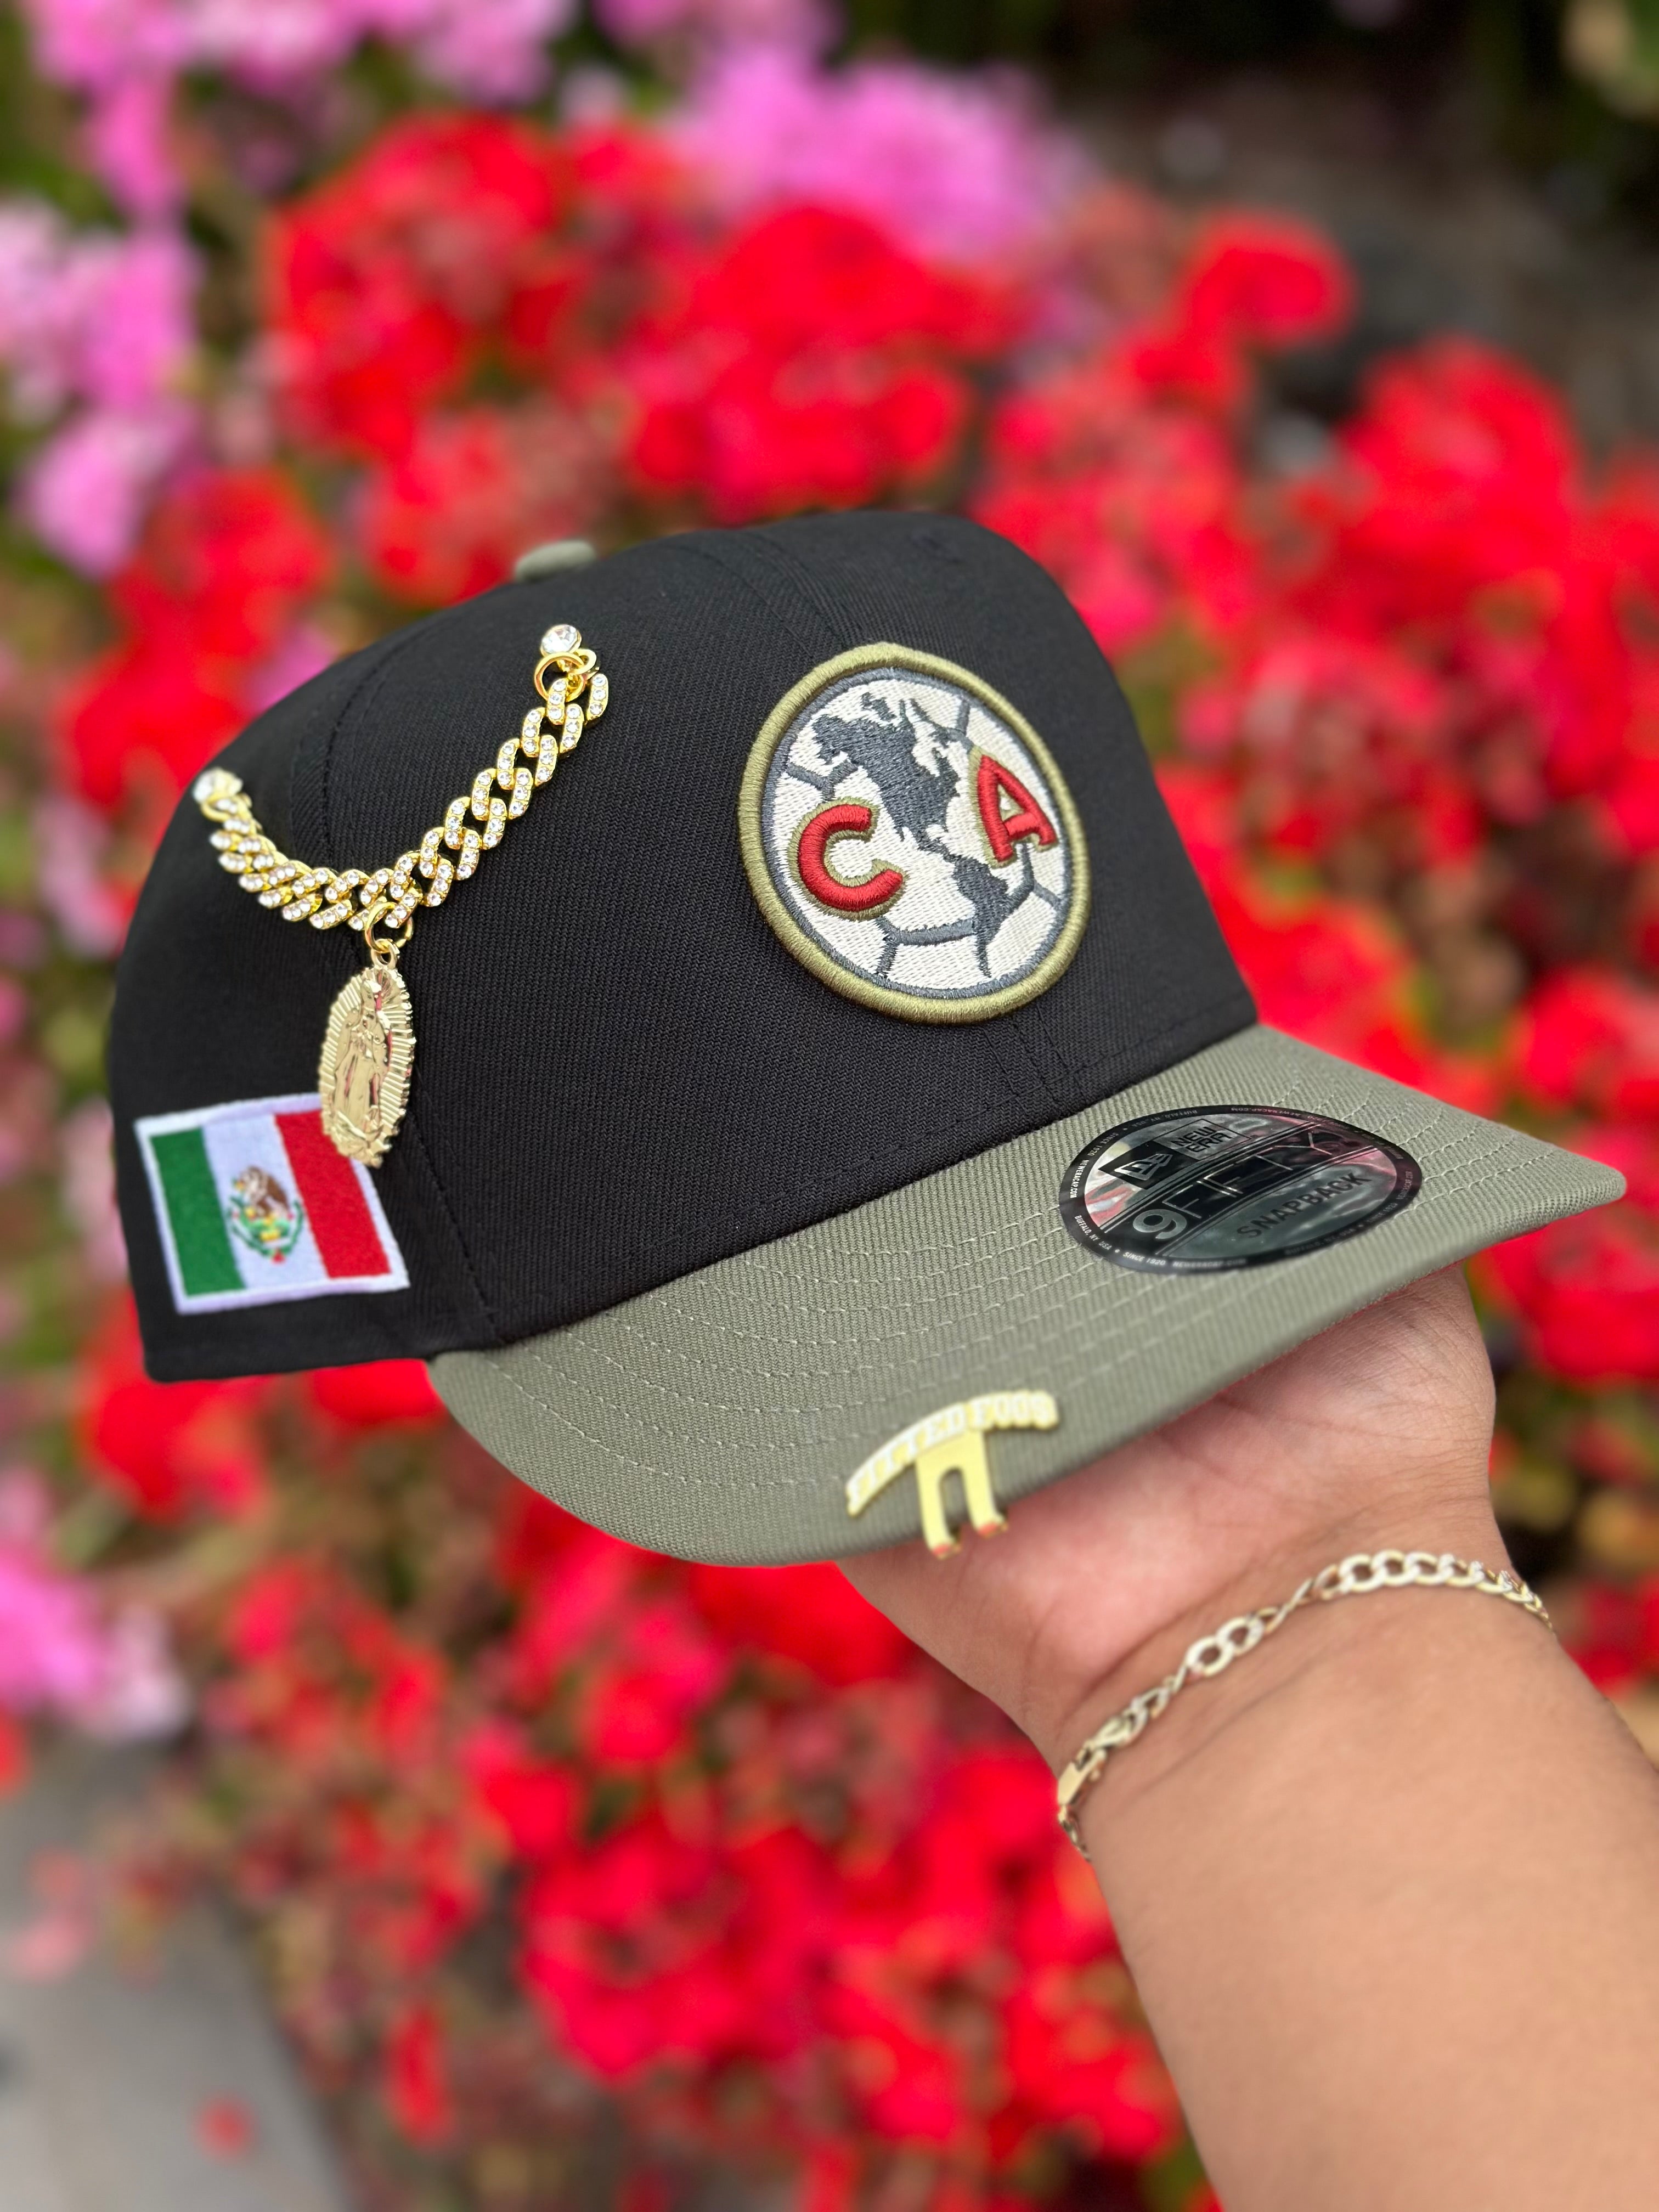 NEW ERA EXCLUSIVE 9FIFTY BLACK/OLIVE "CLUB AMERICA" SNAPBACK W/MEXICO FLAG SIDEPATCH